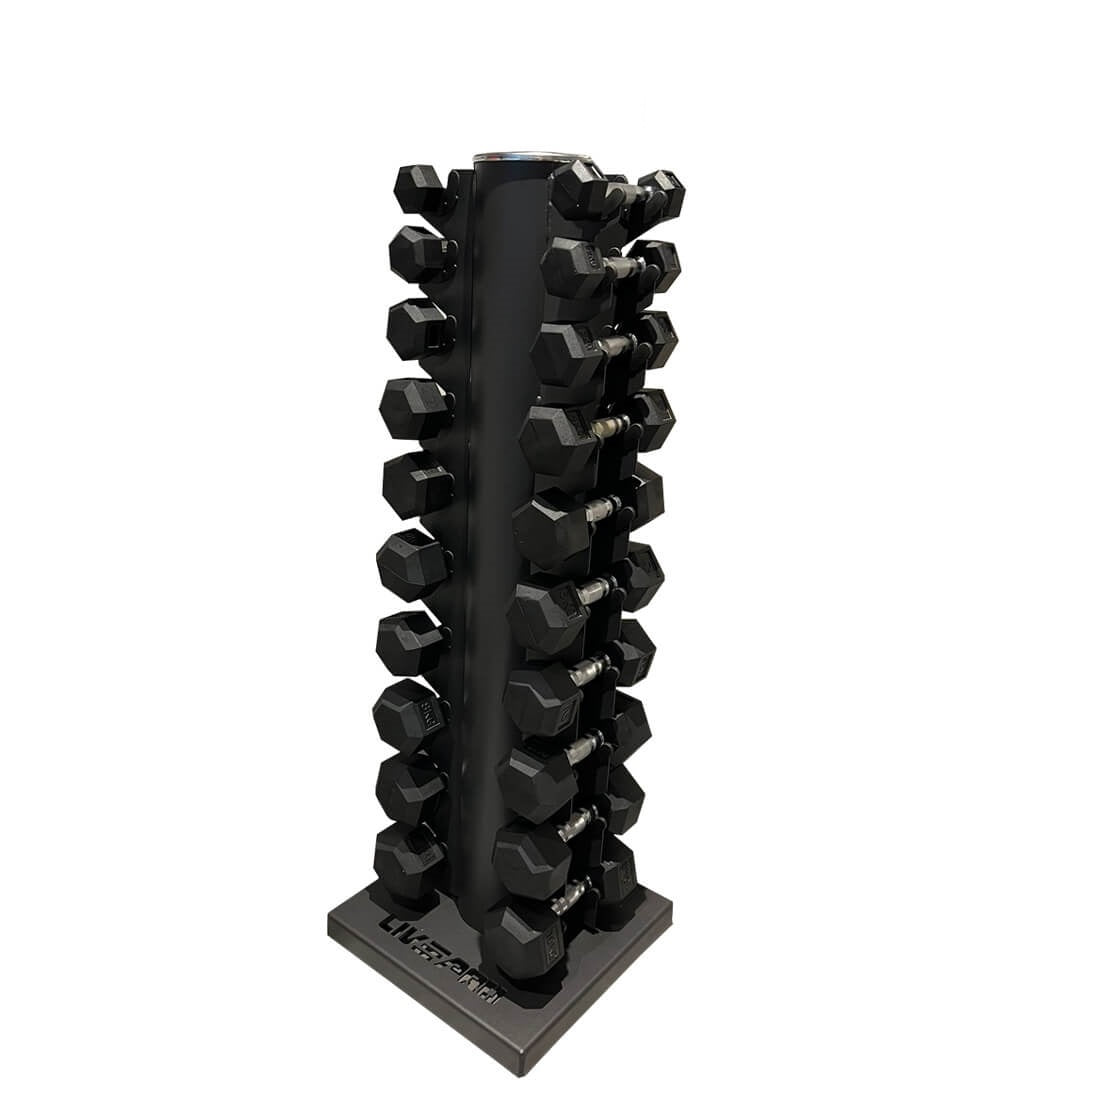 Hex Dumbbell Set with Vertical Rack